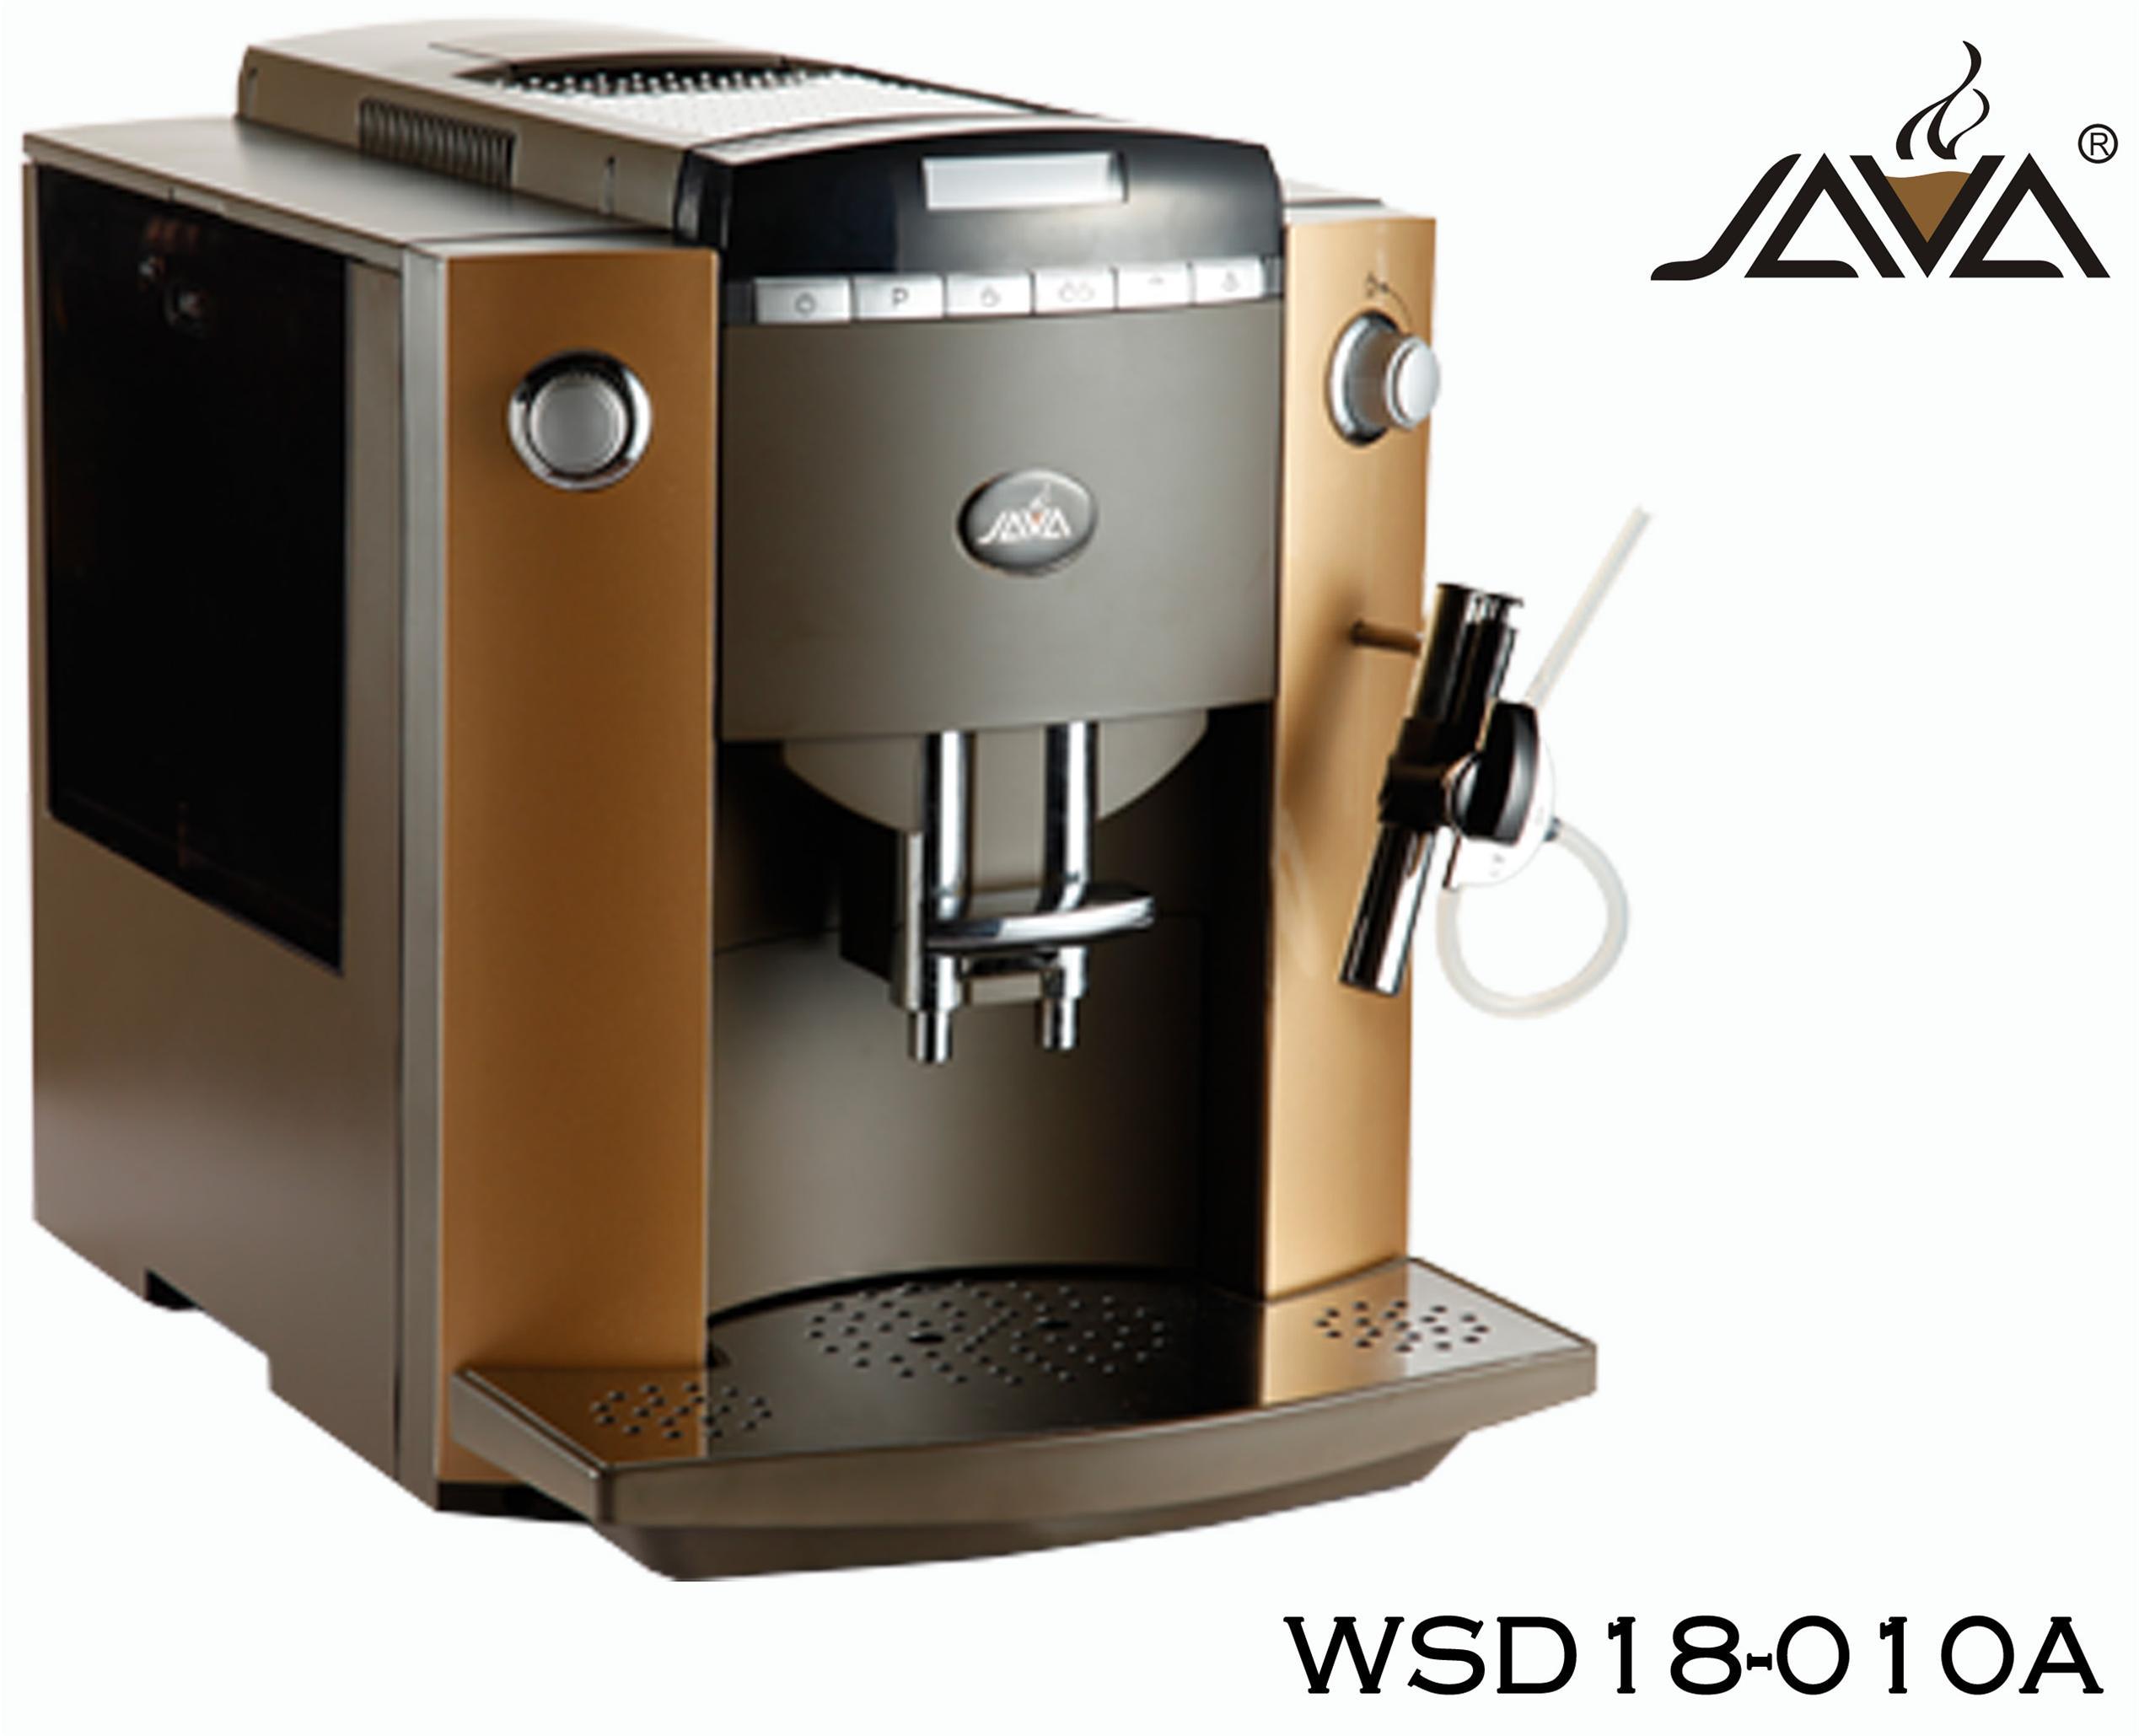 Italy Style Cafe Coffee Machine Automatic